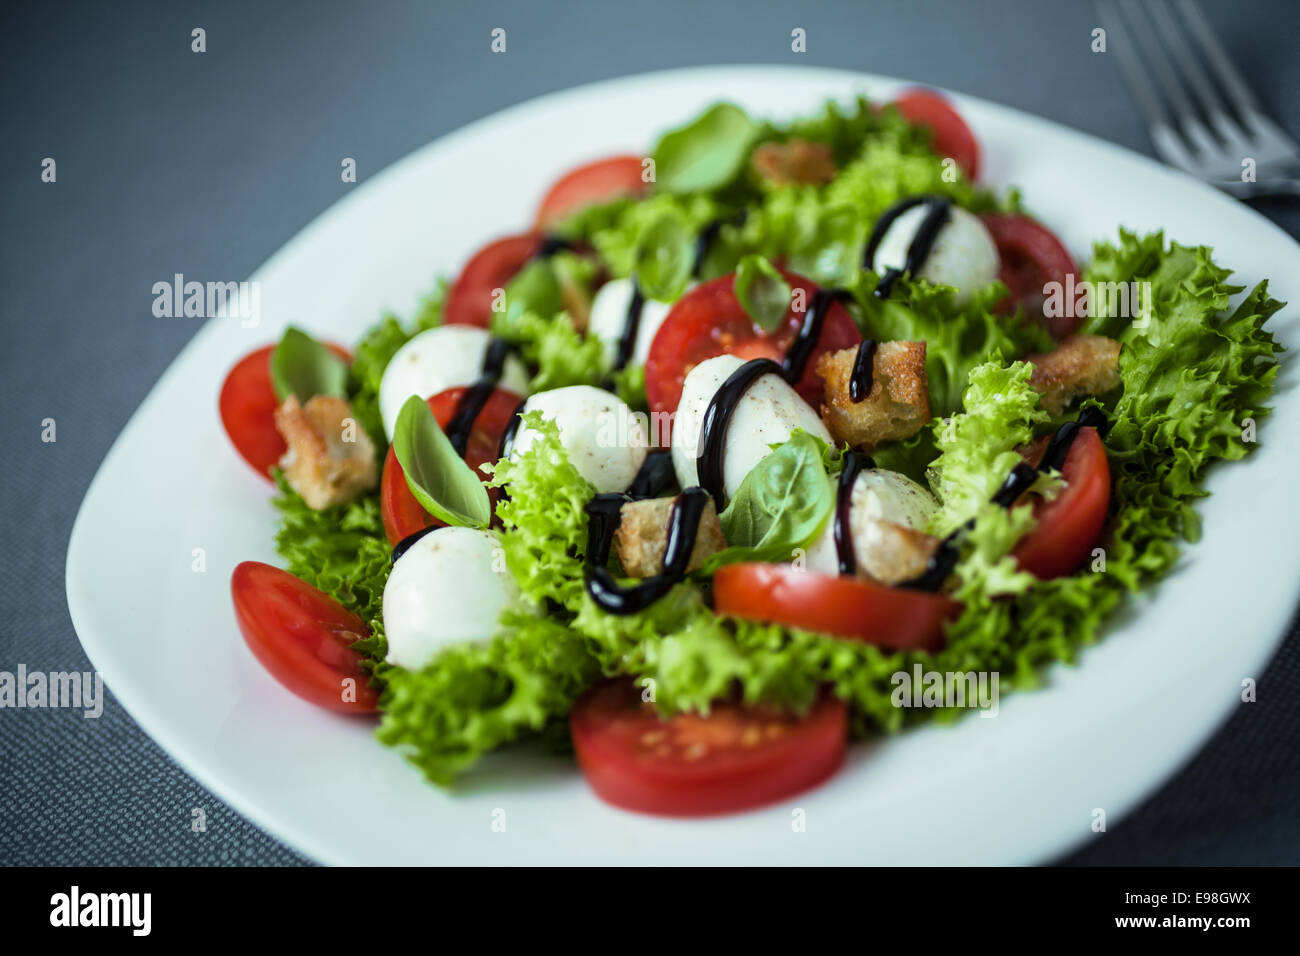 Italian salad with mozzarella pearls, tomato, crunchy croutons and lettuce drizzled with sauce or dressing, close up high angle Stock Photo